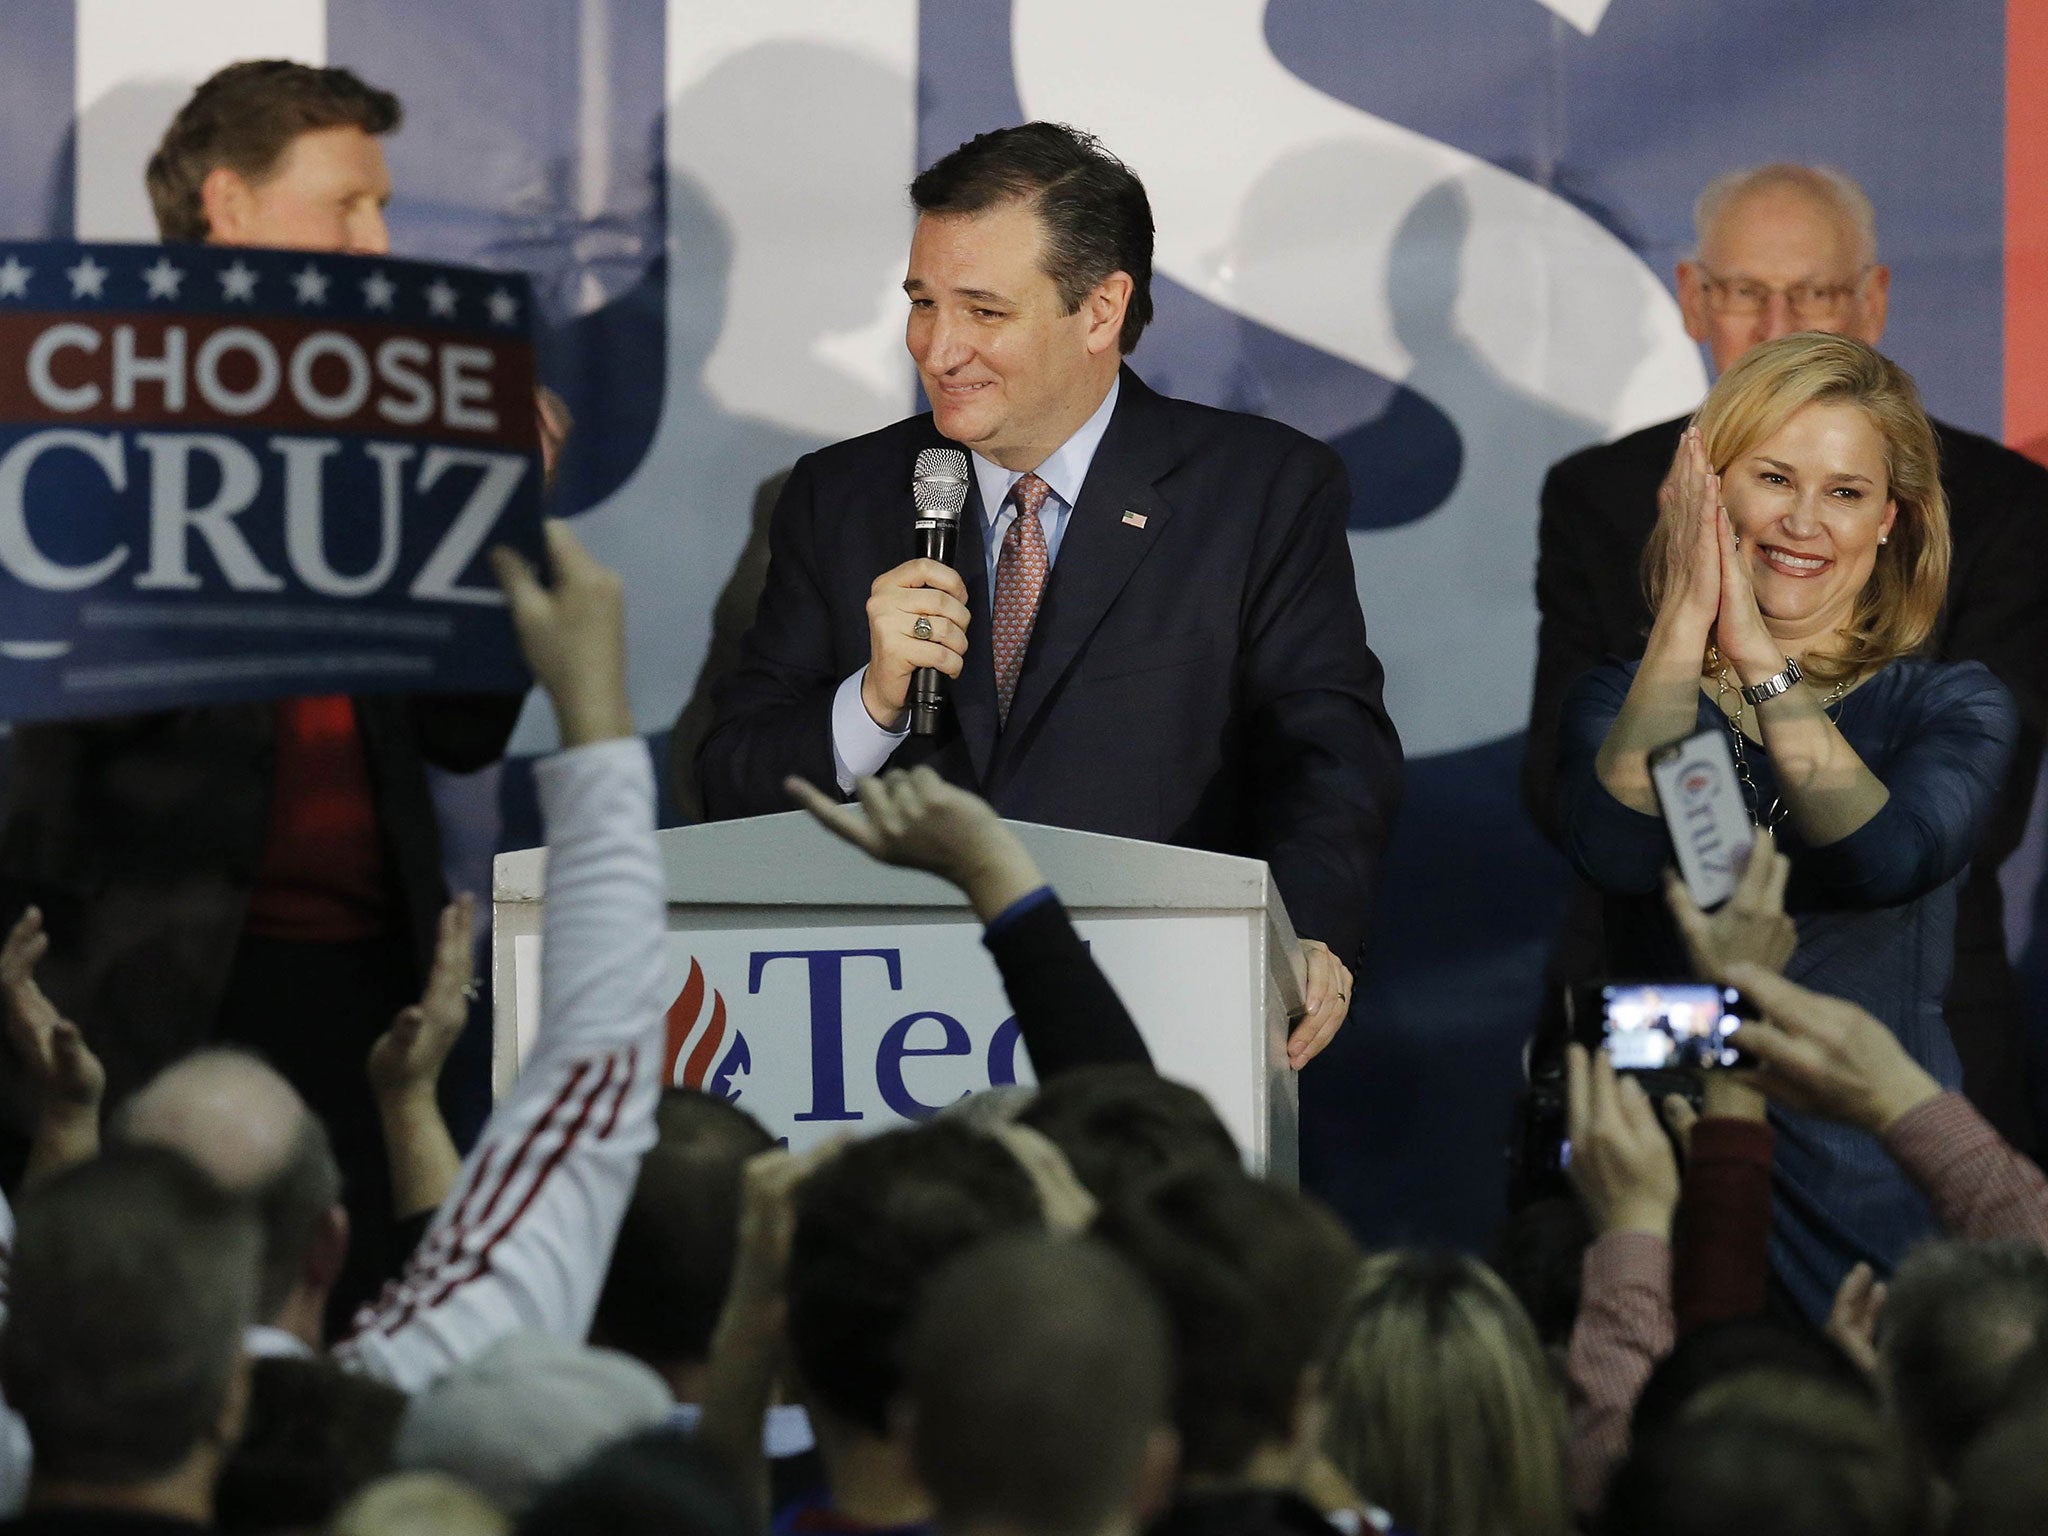 Ted Cruz said: 'Tonight is a victory for the grass roots'